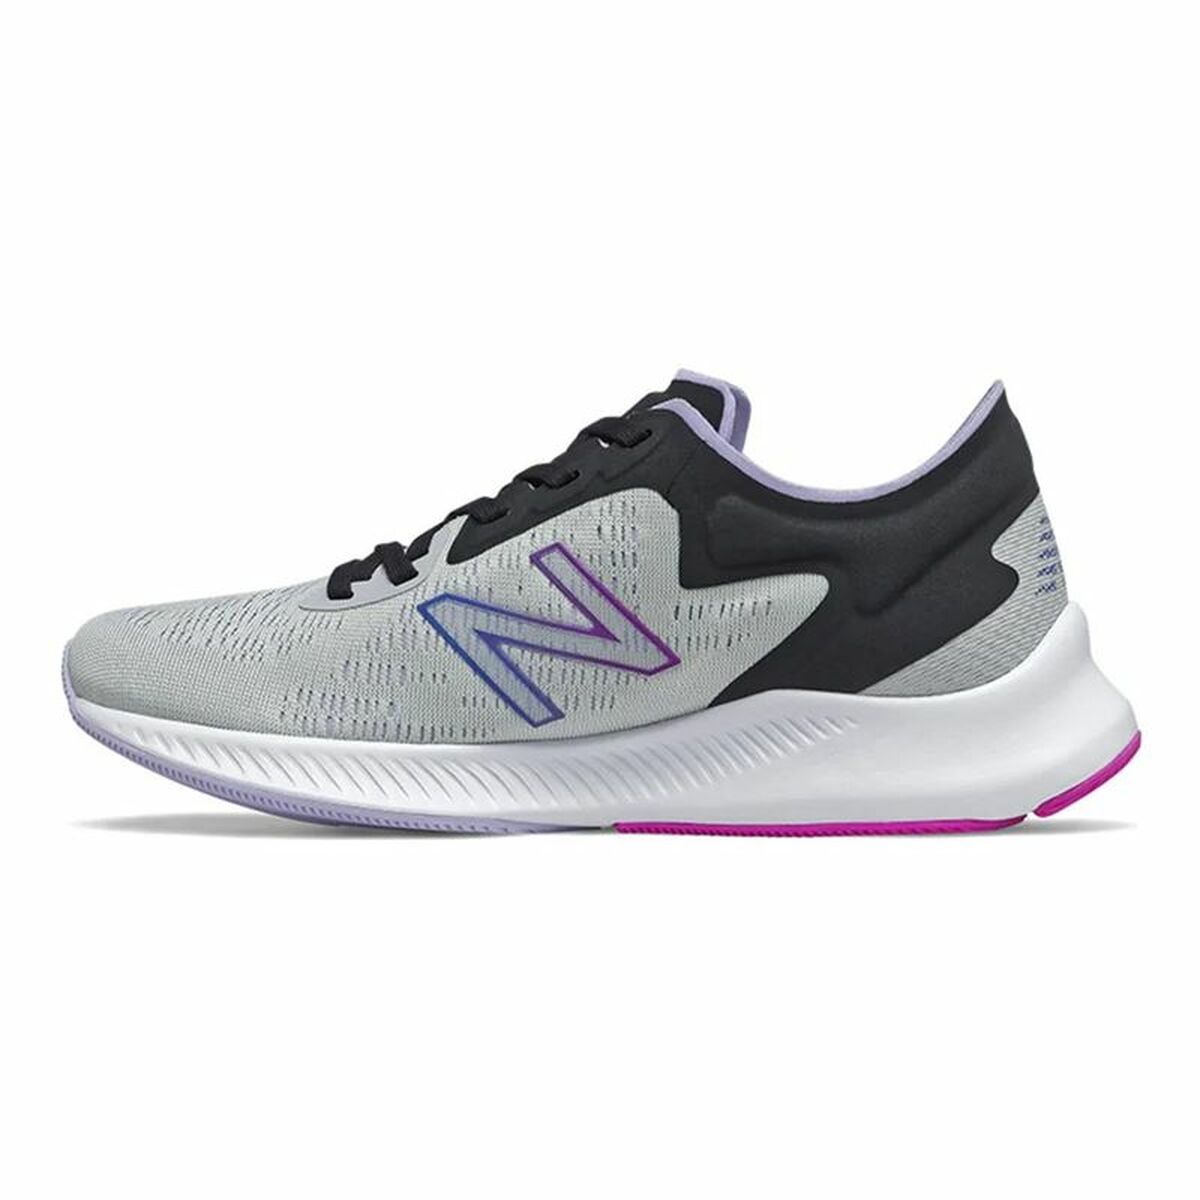 Sports Trainers for Women New Balance WPESULM1 Light grey Lady